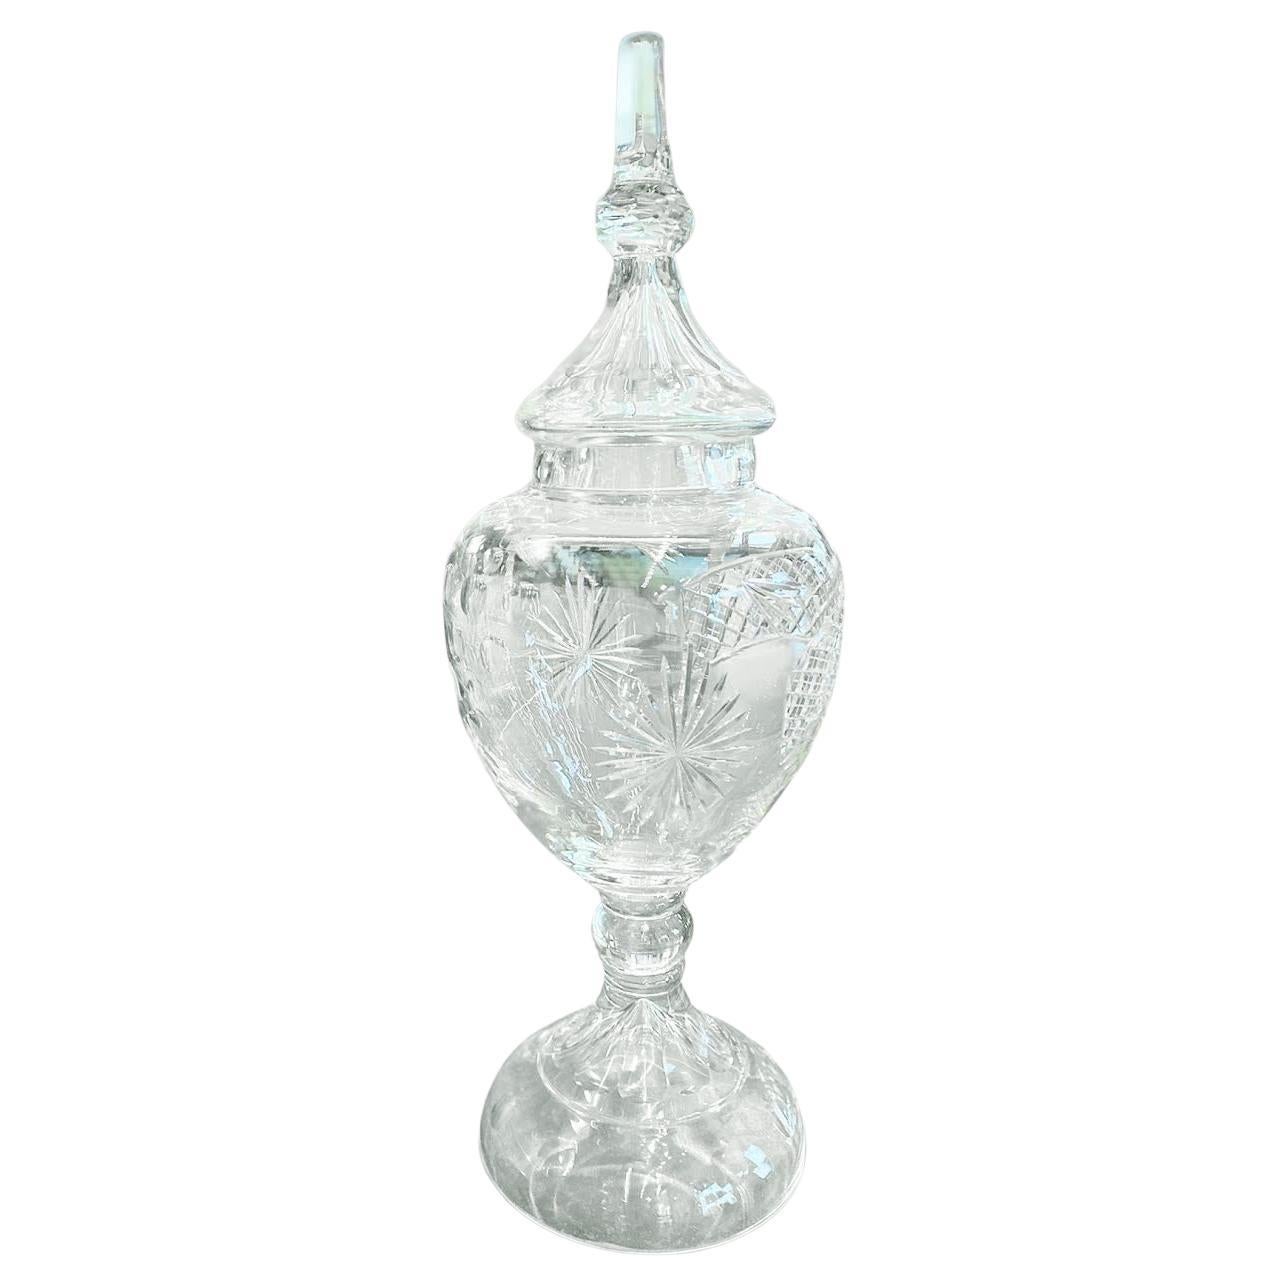 Early 20th Century Tall Cut Glass Apothecary Vase